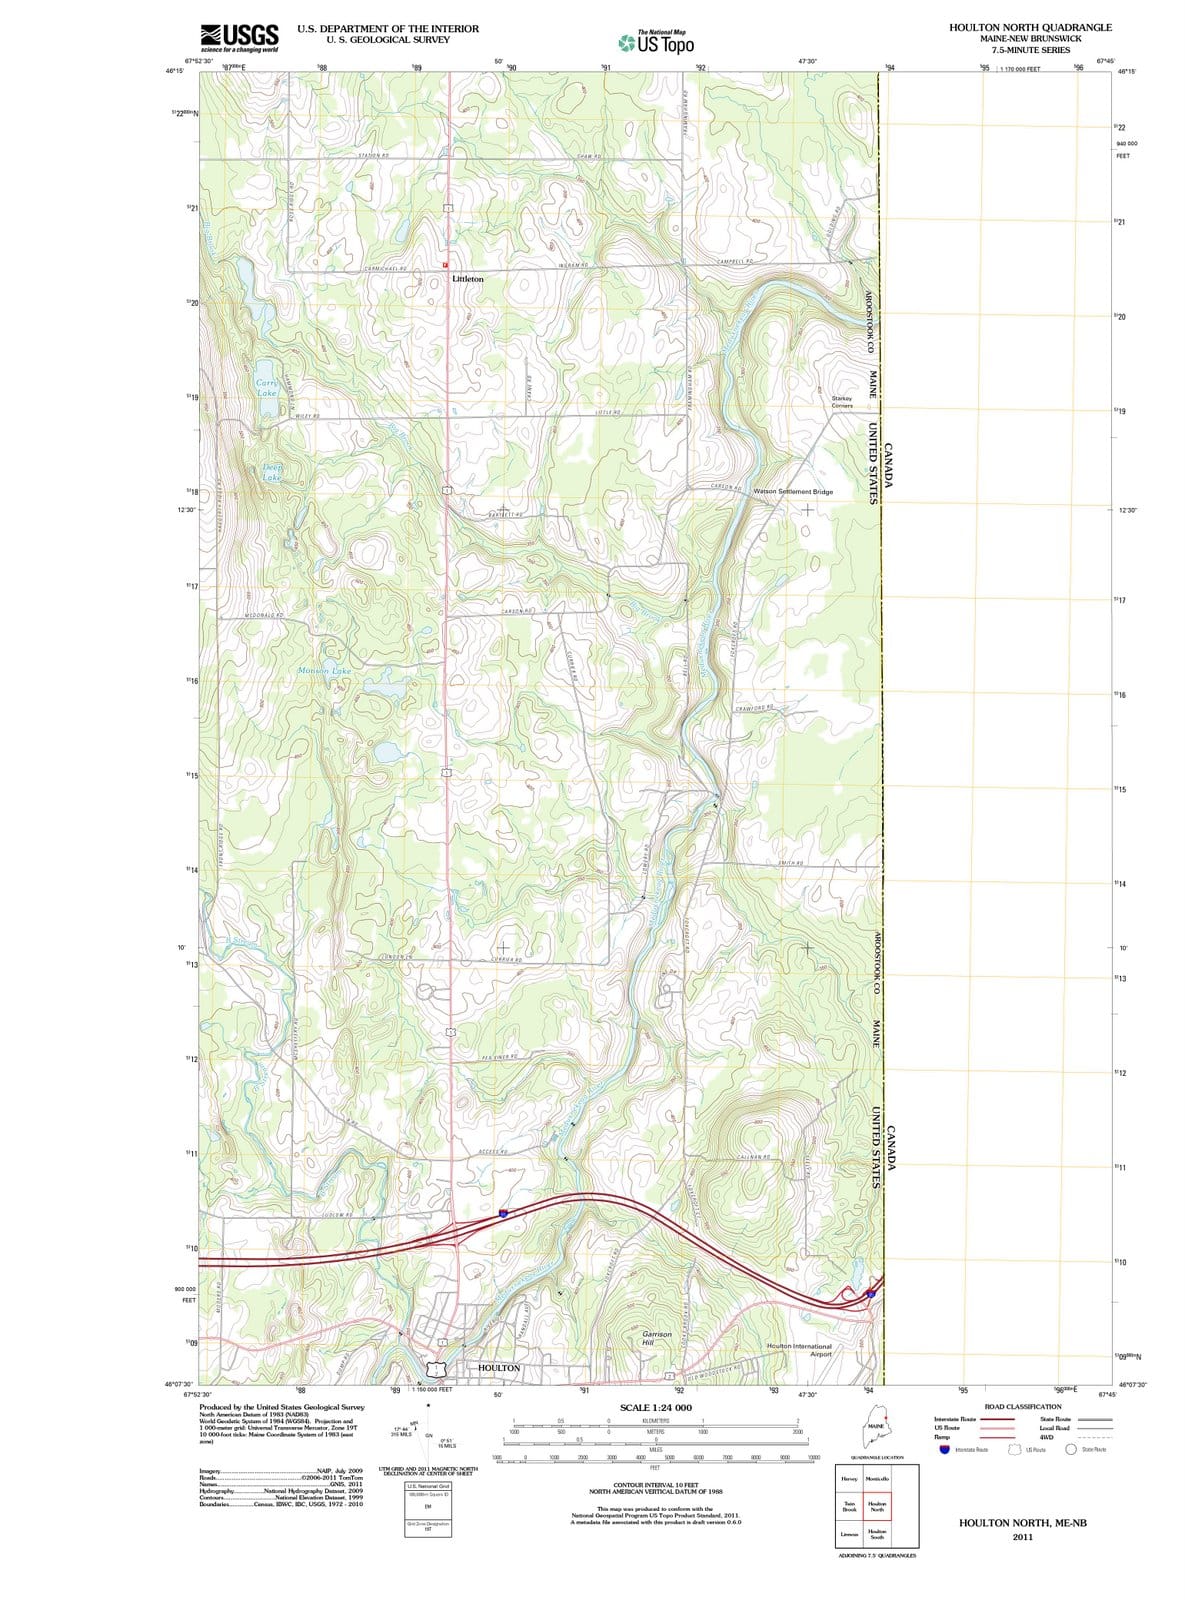 2011 Houlton North, ME - Maine - USGS Topographic Map